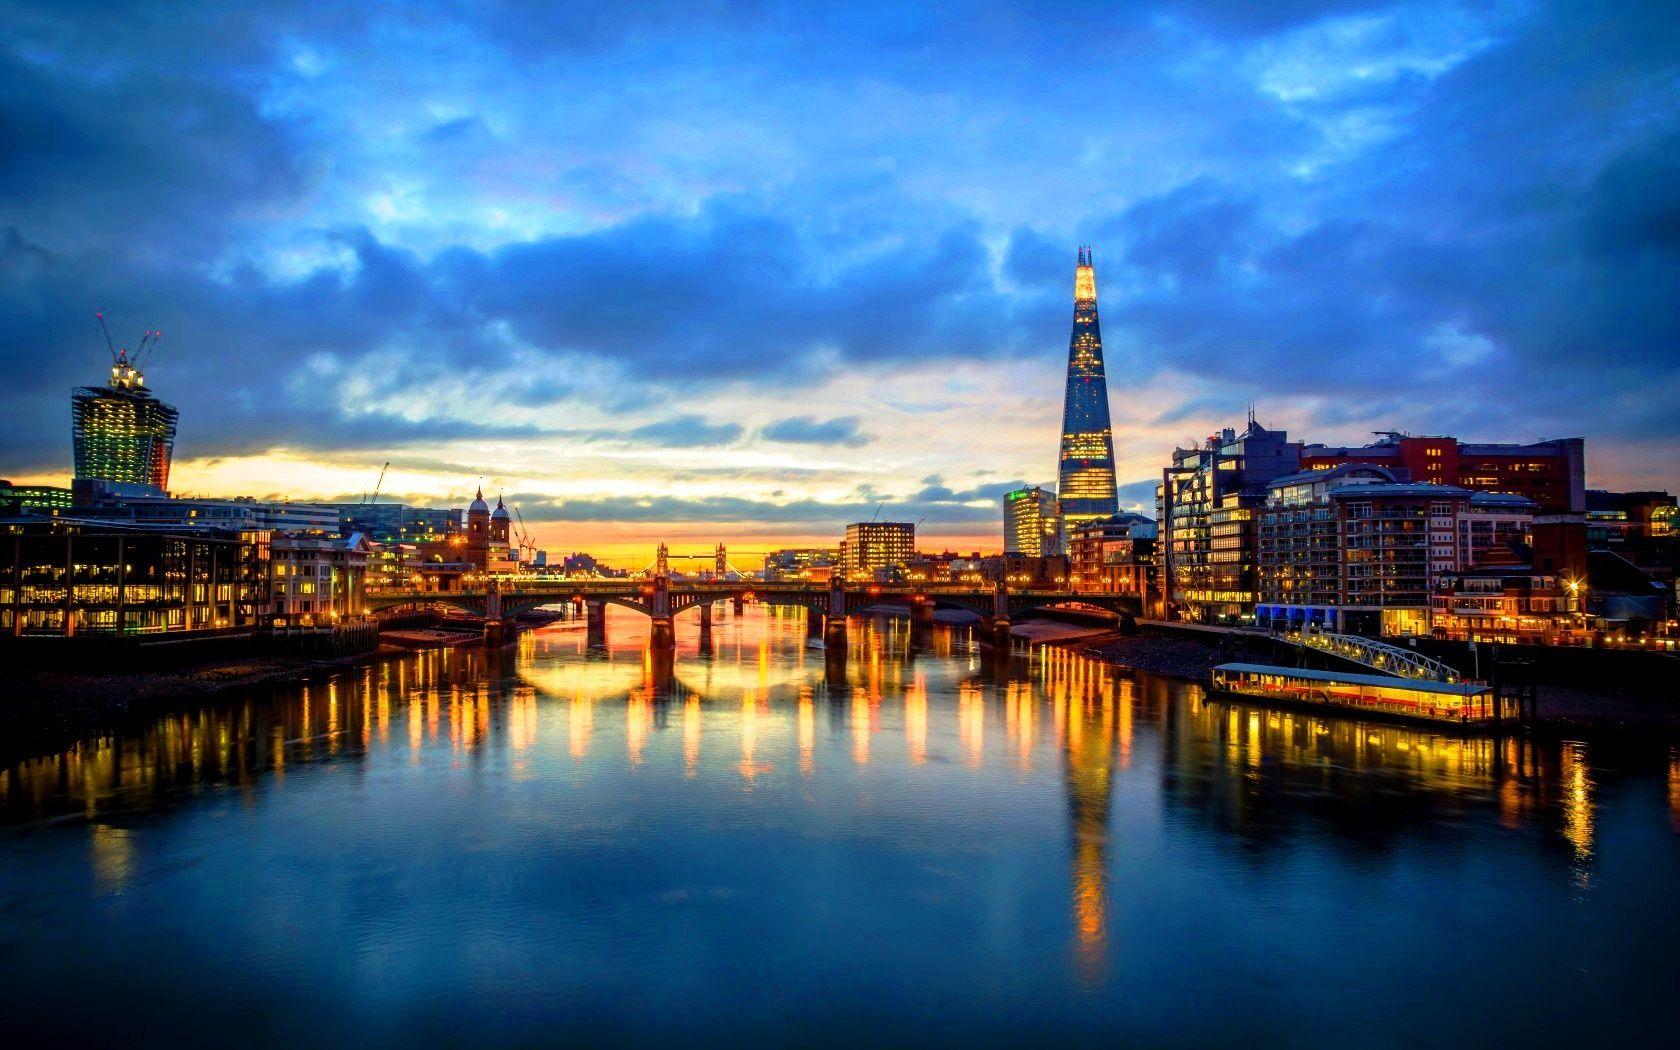 London Skyline at Night Wallpapers - Top Free London Skyline at Night